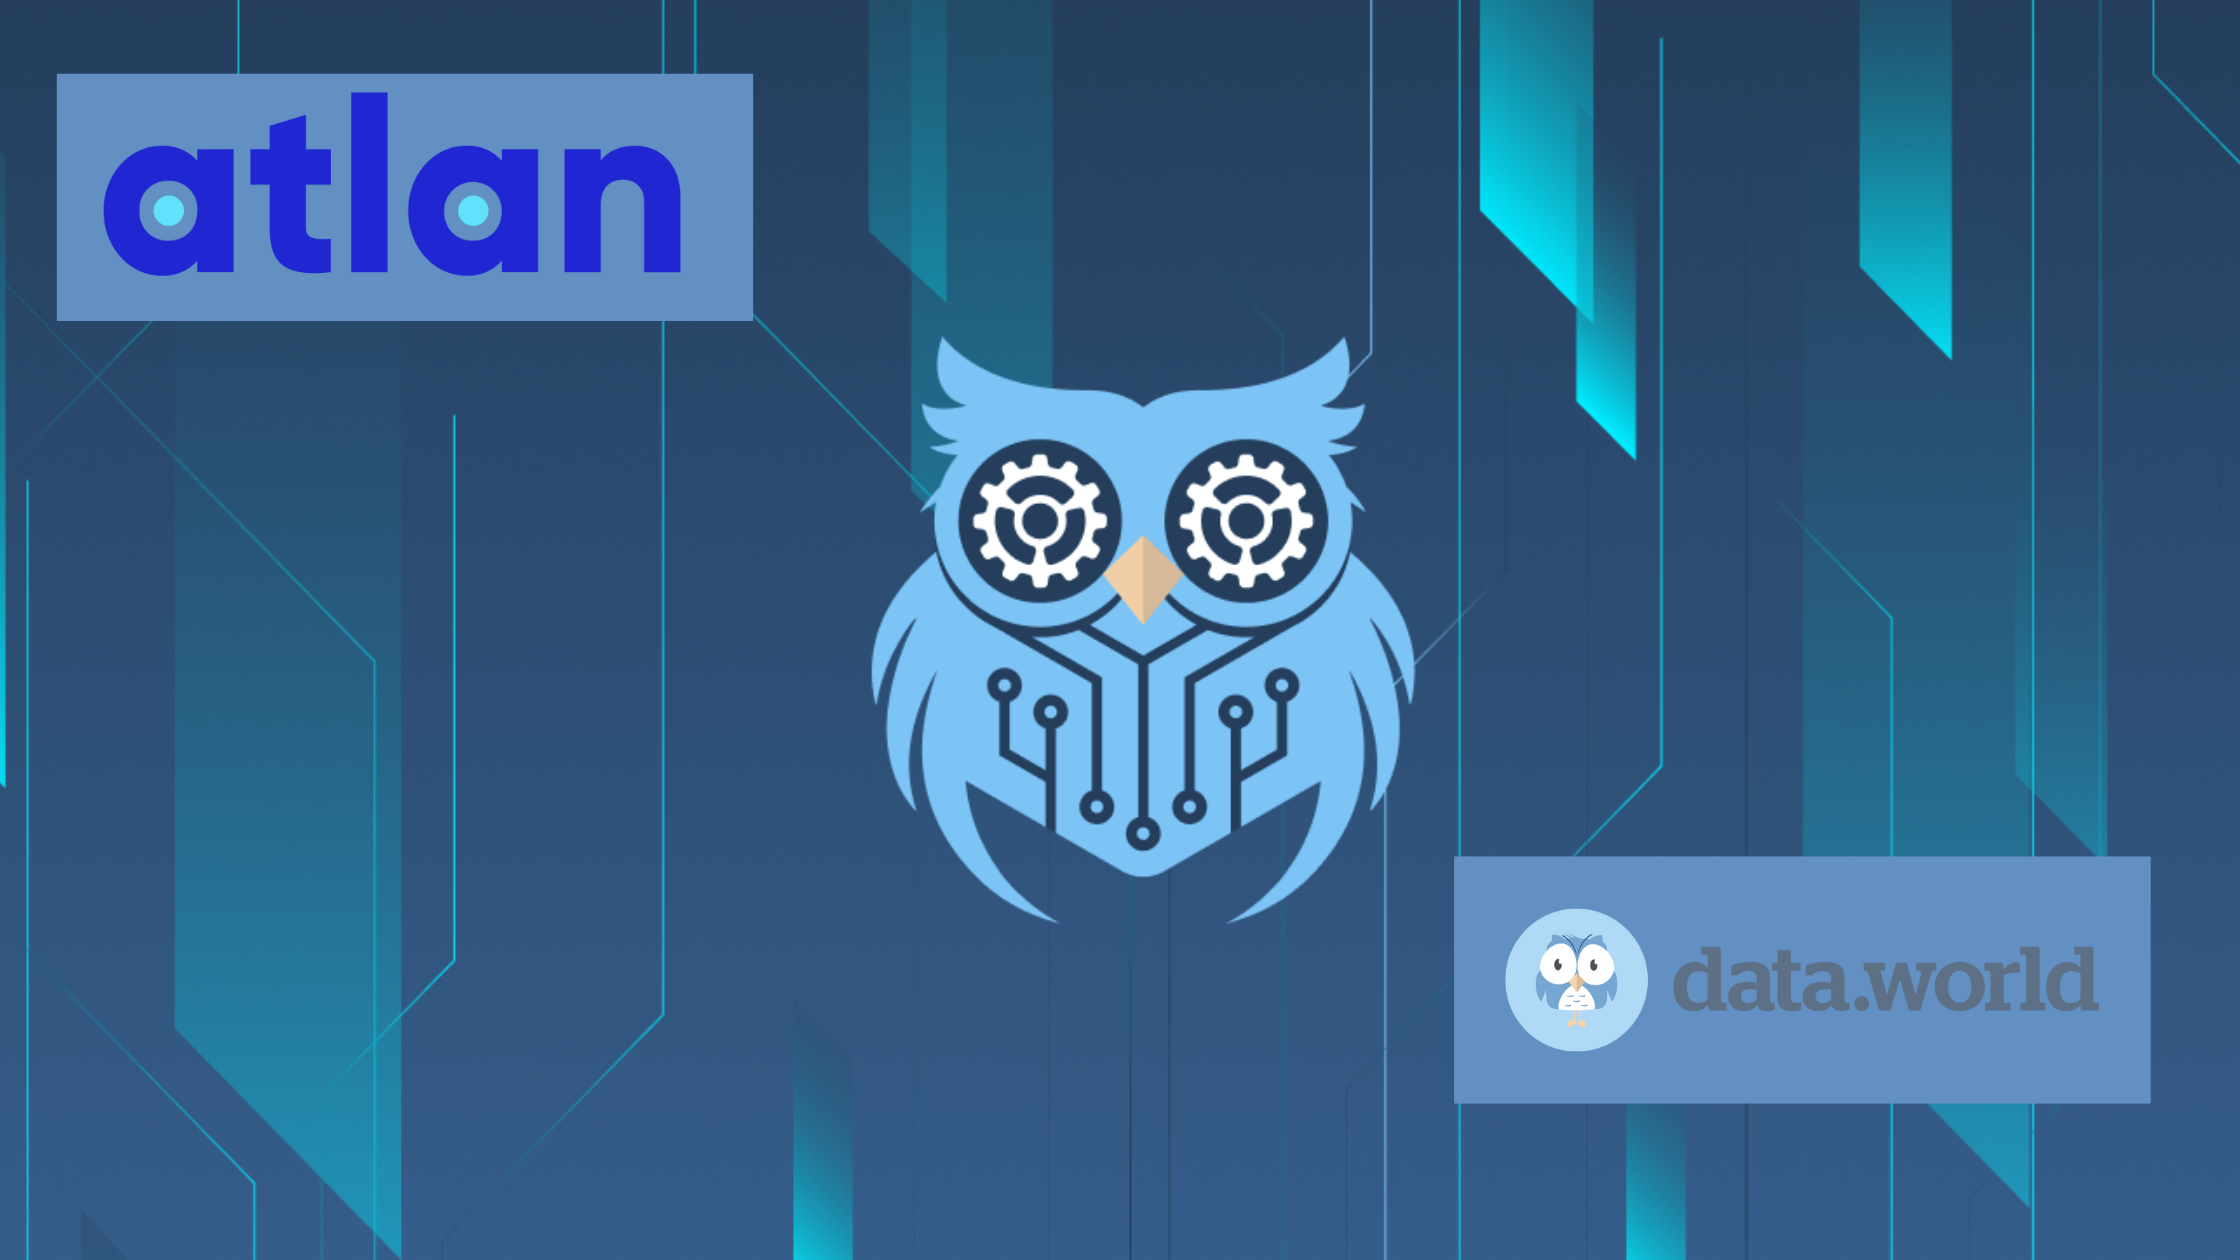 Image of data.world and atlan's logo, plus the data.world owl mascot against a blue background